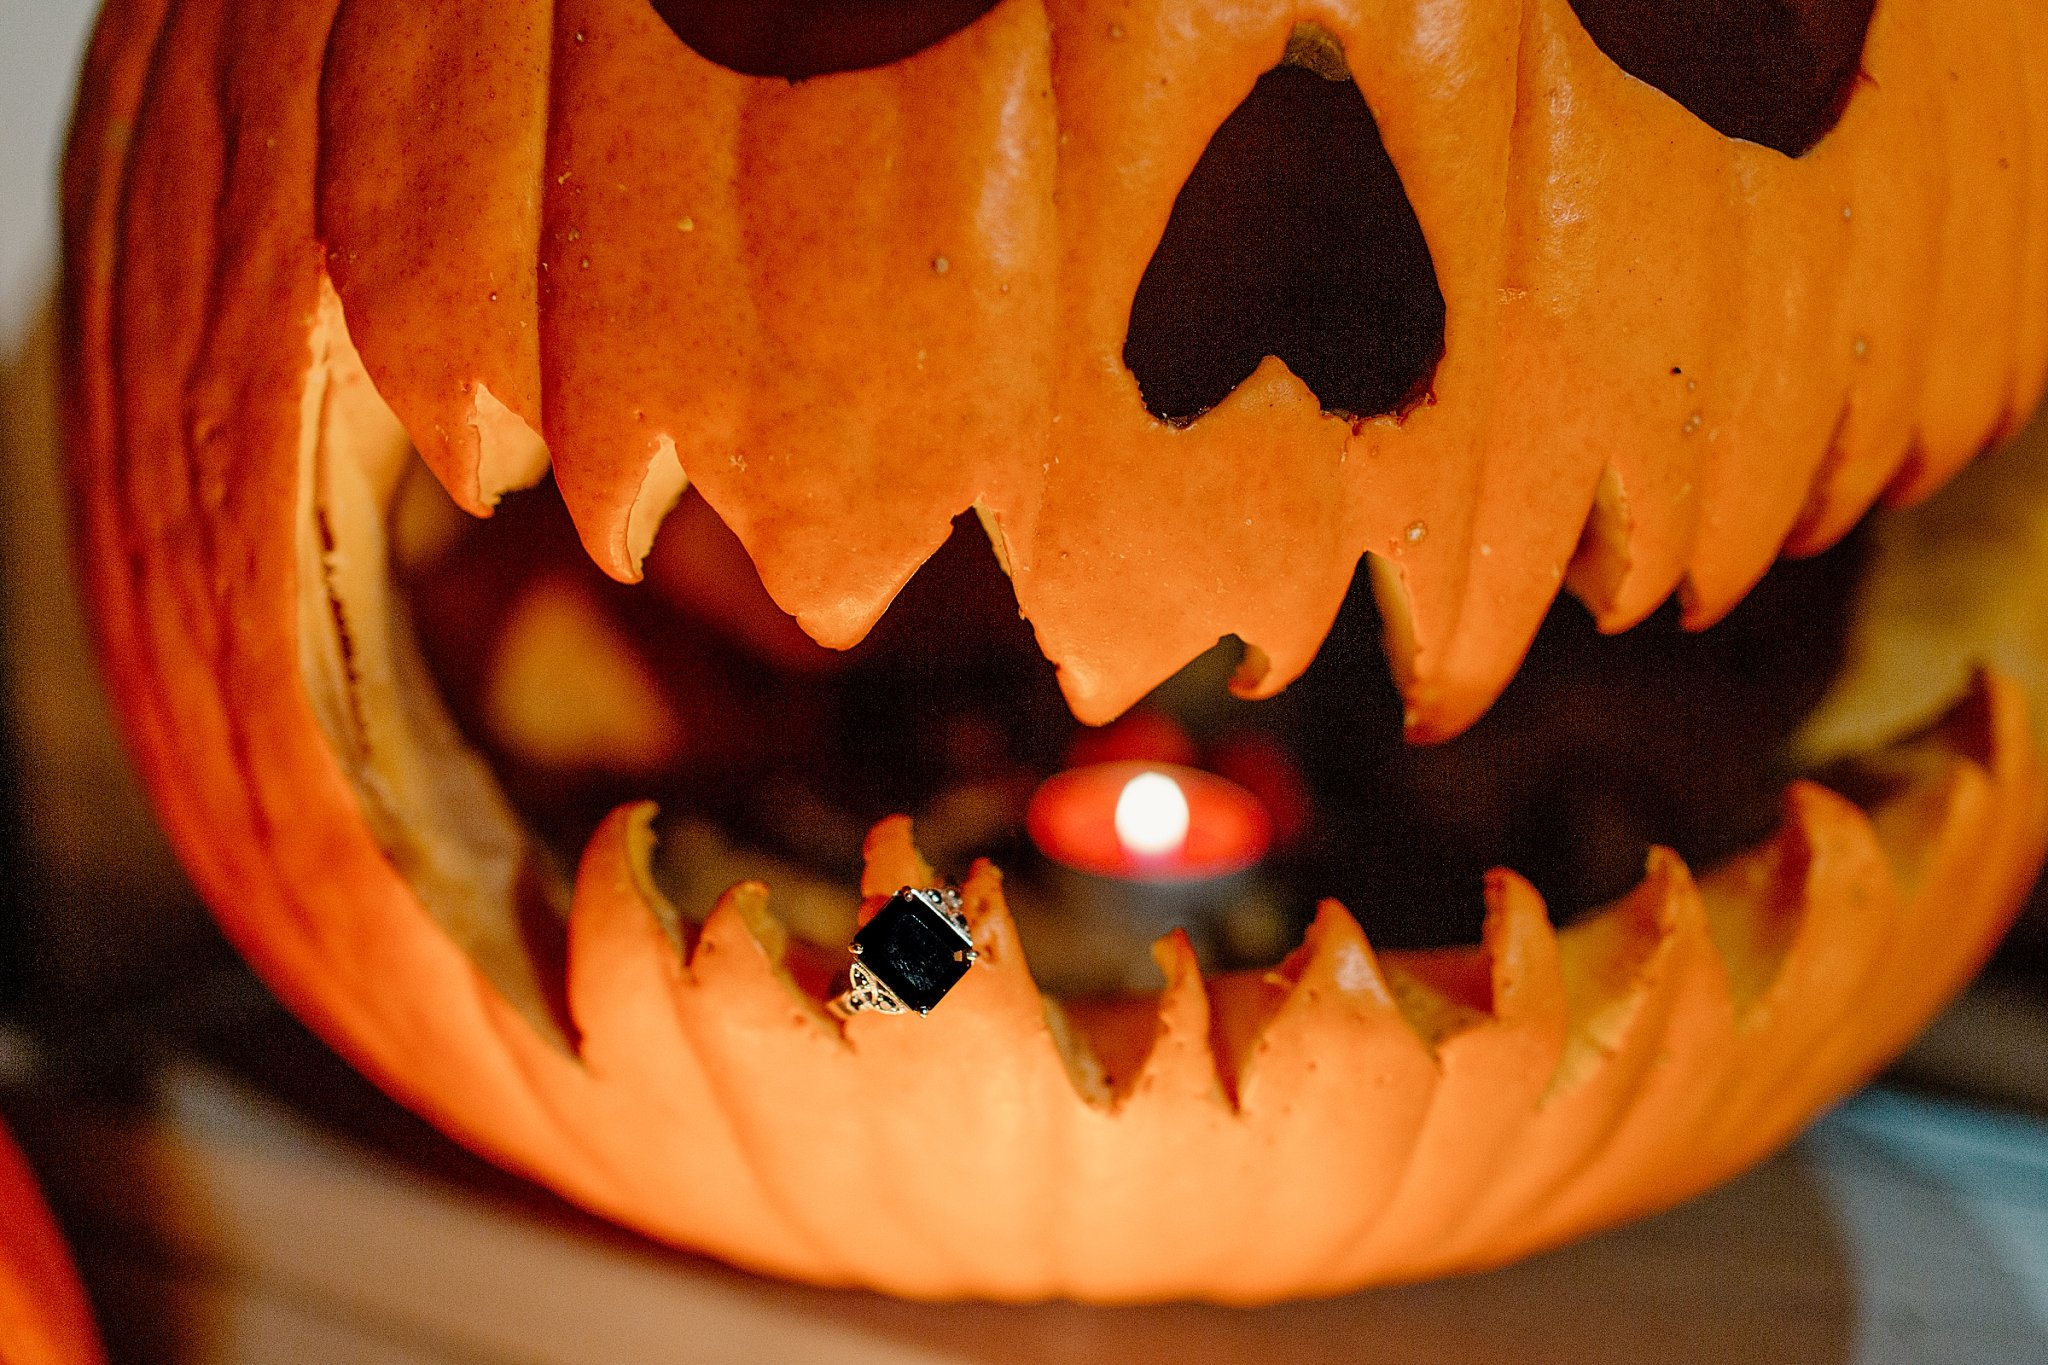  Ring hangs off tooth of jack-o-lantern at Halloween engagement session 